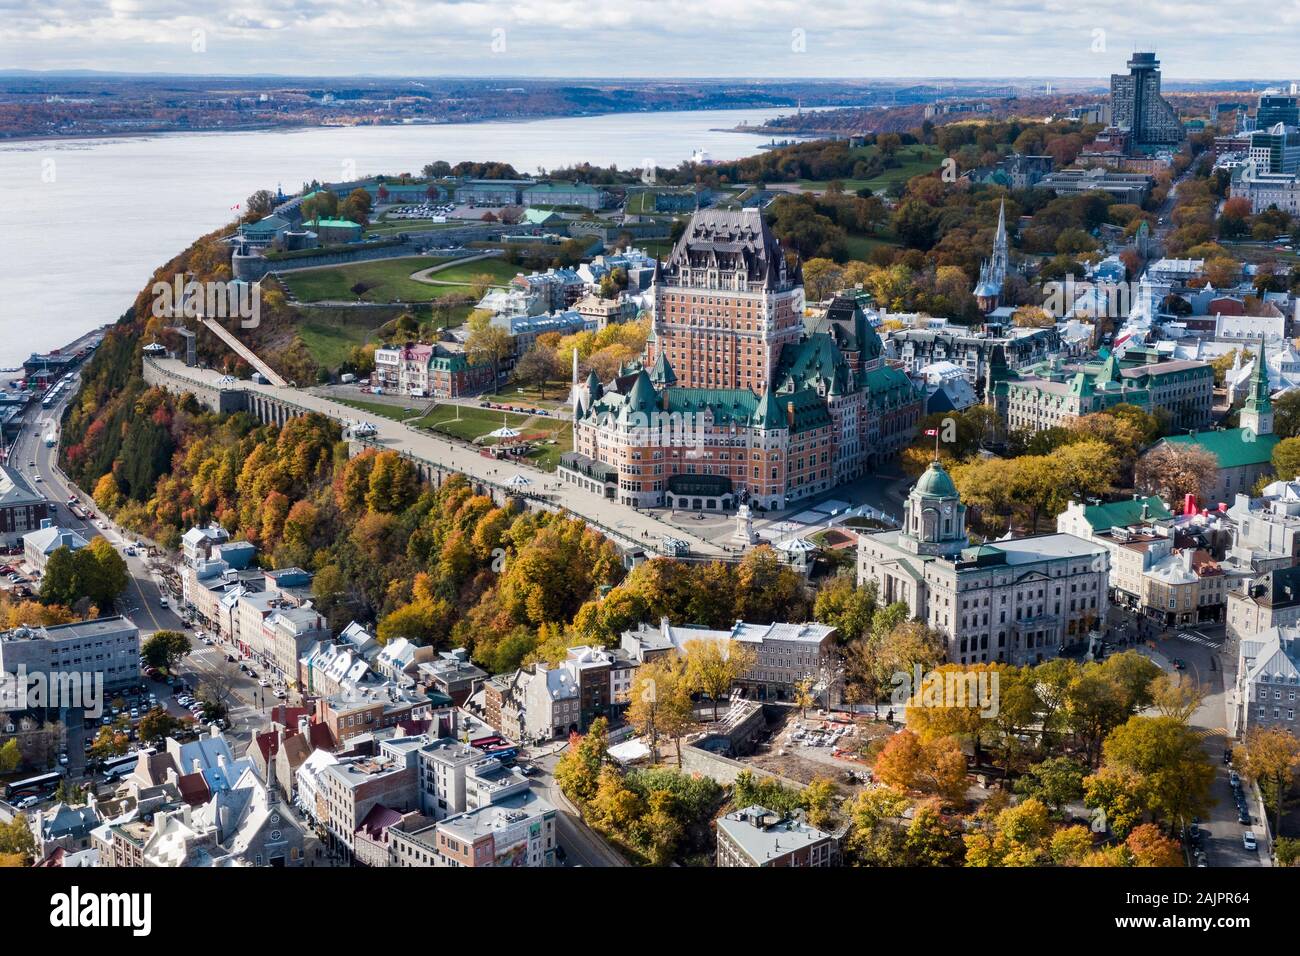 Aerial view of Frontenac Castle in Old Quebec City during Fall season, Quebec, Canada. Stock Photo